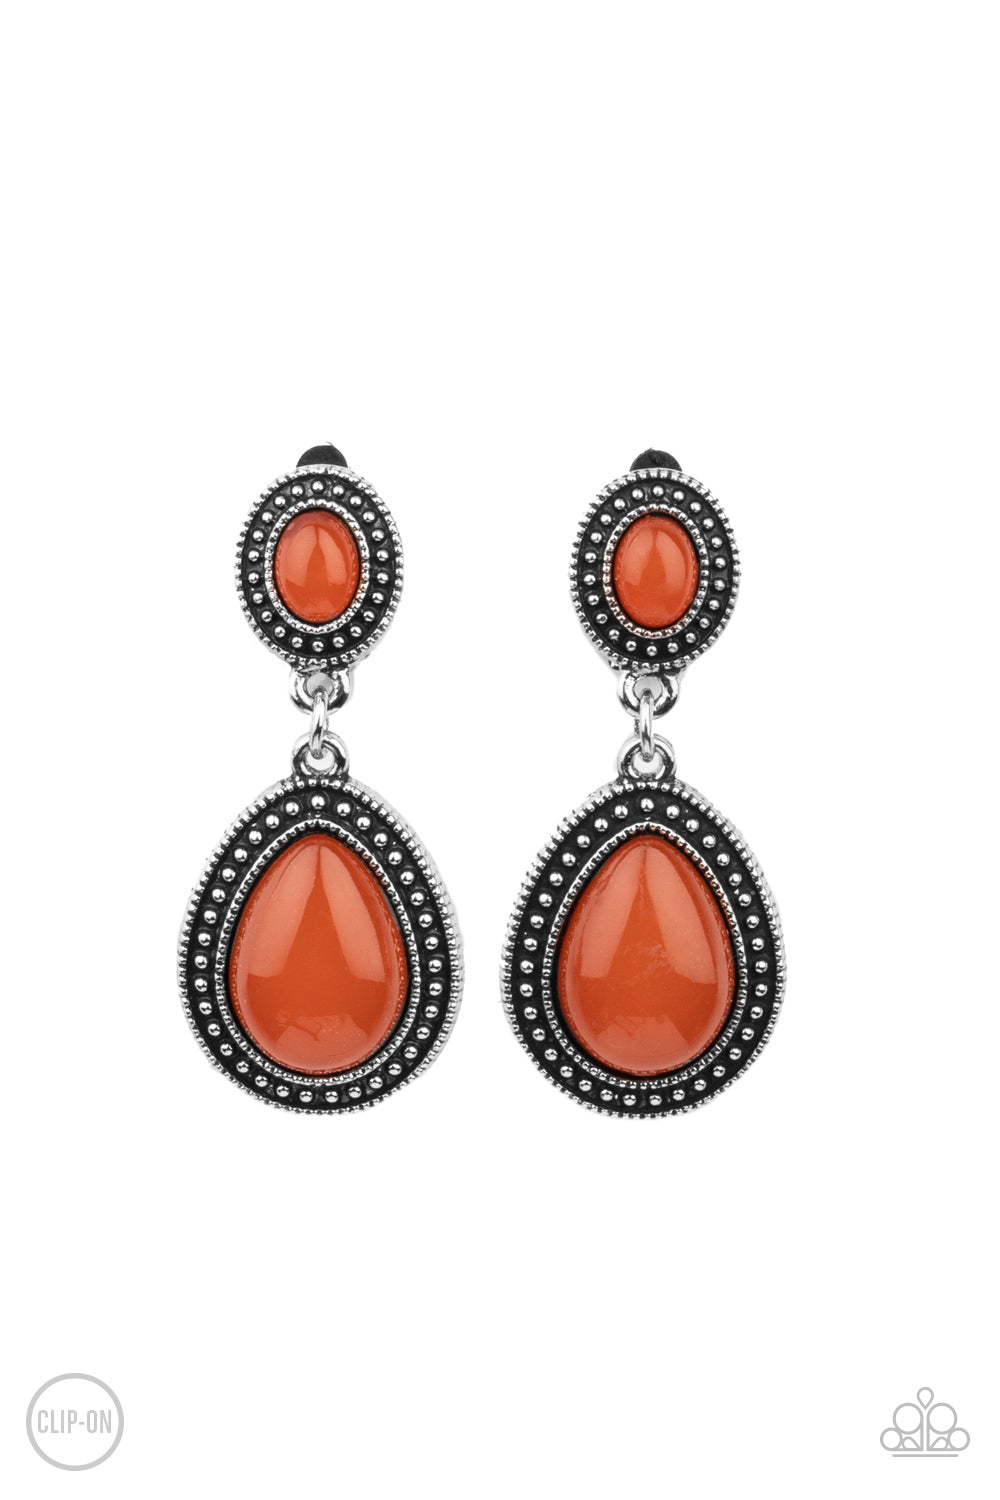 Carefree Clairvoyance - Orange Stone Clip-On Earrings - Princess Glam Shop